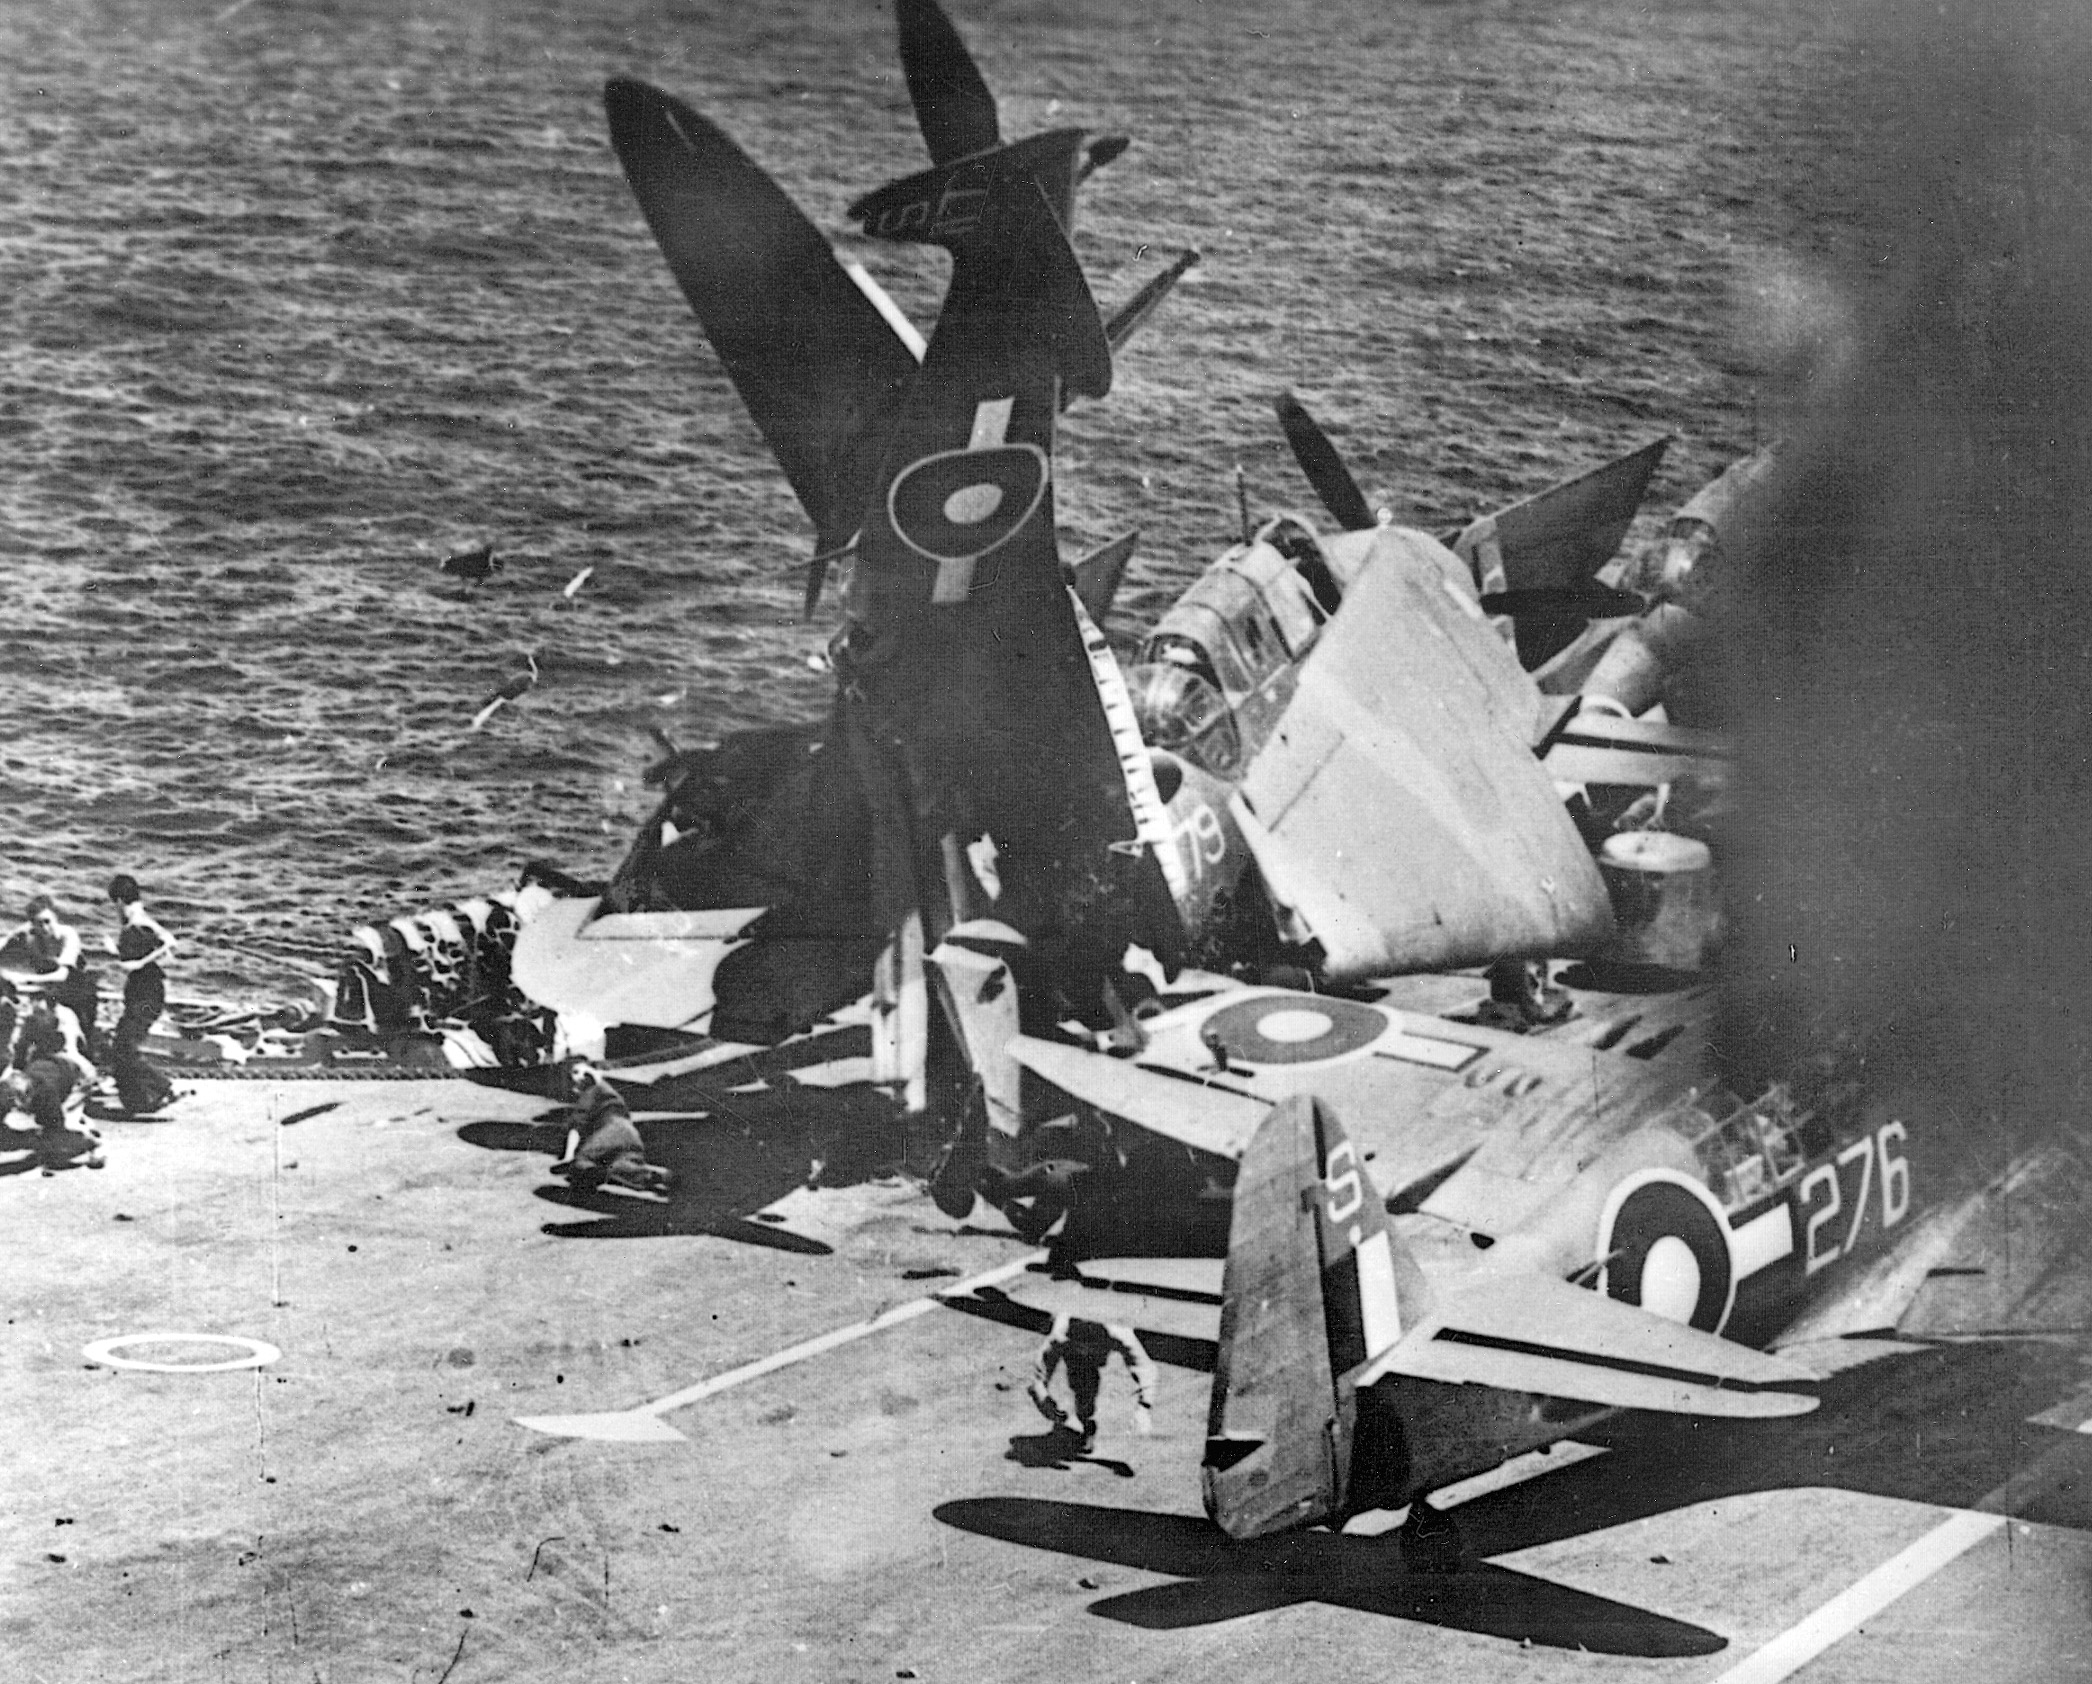 A heap of twisted steel litters the deck of a British carrier after a Spitfire crashed on landing in the Pacific, July 1945.